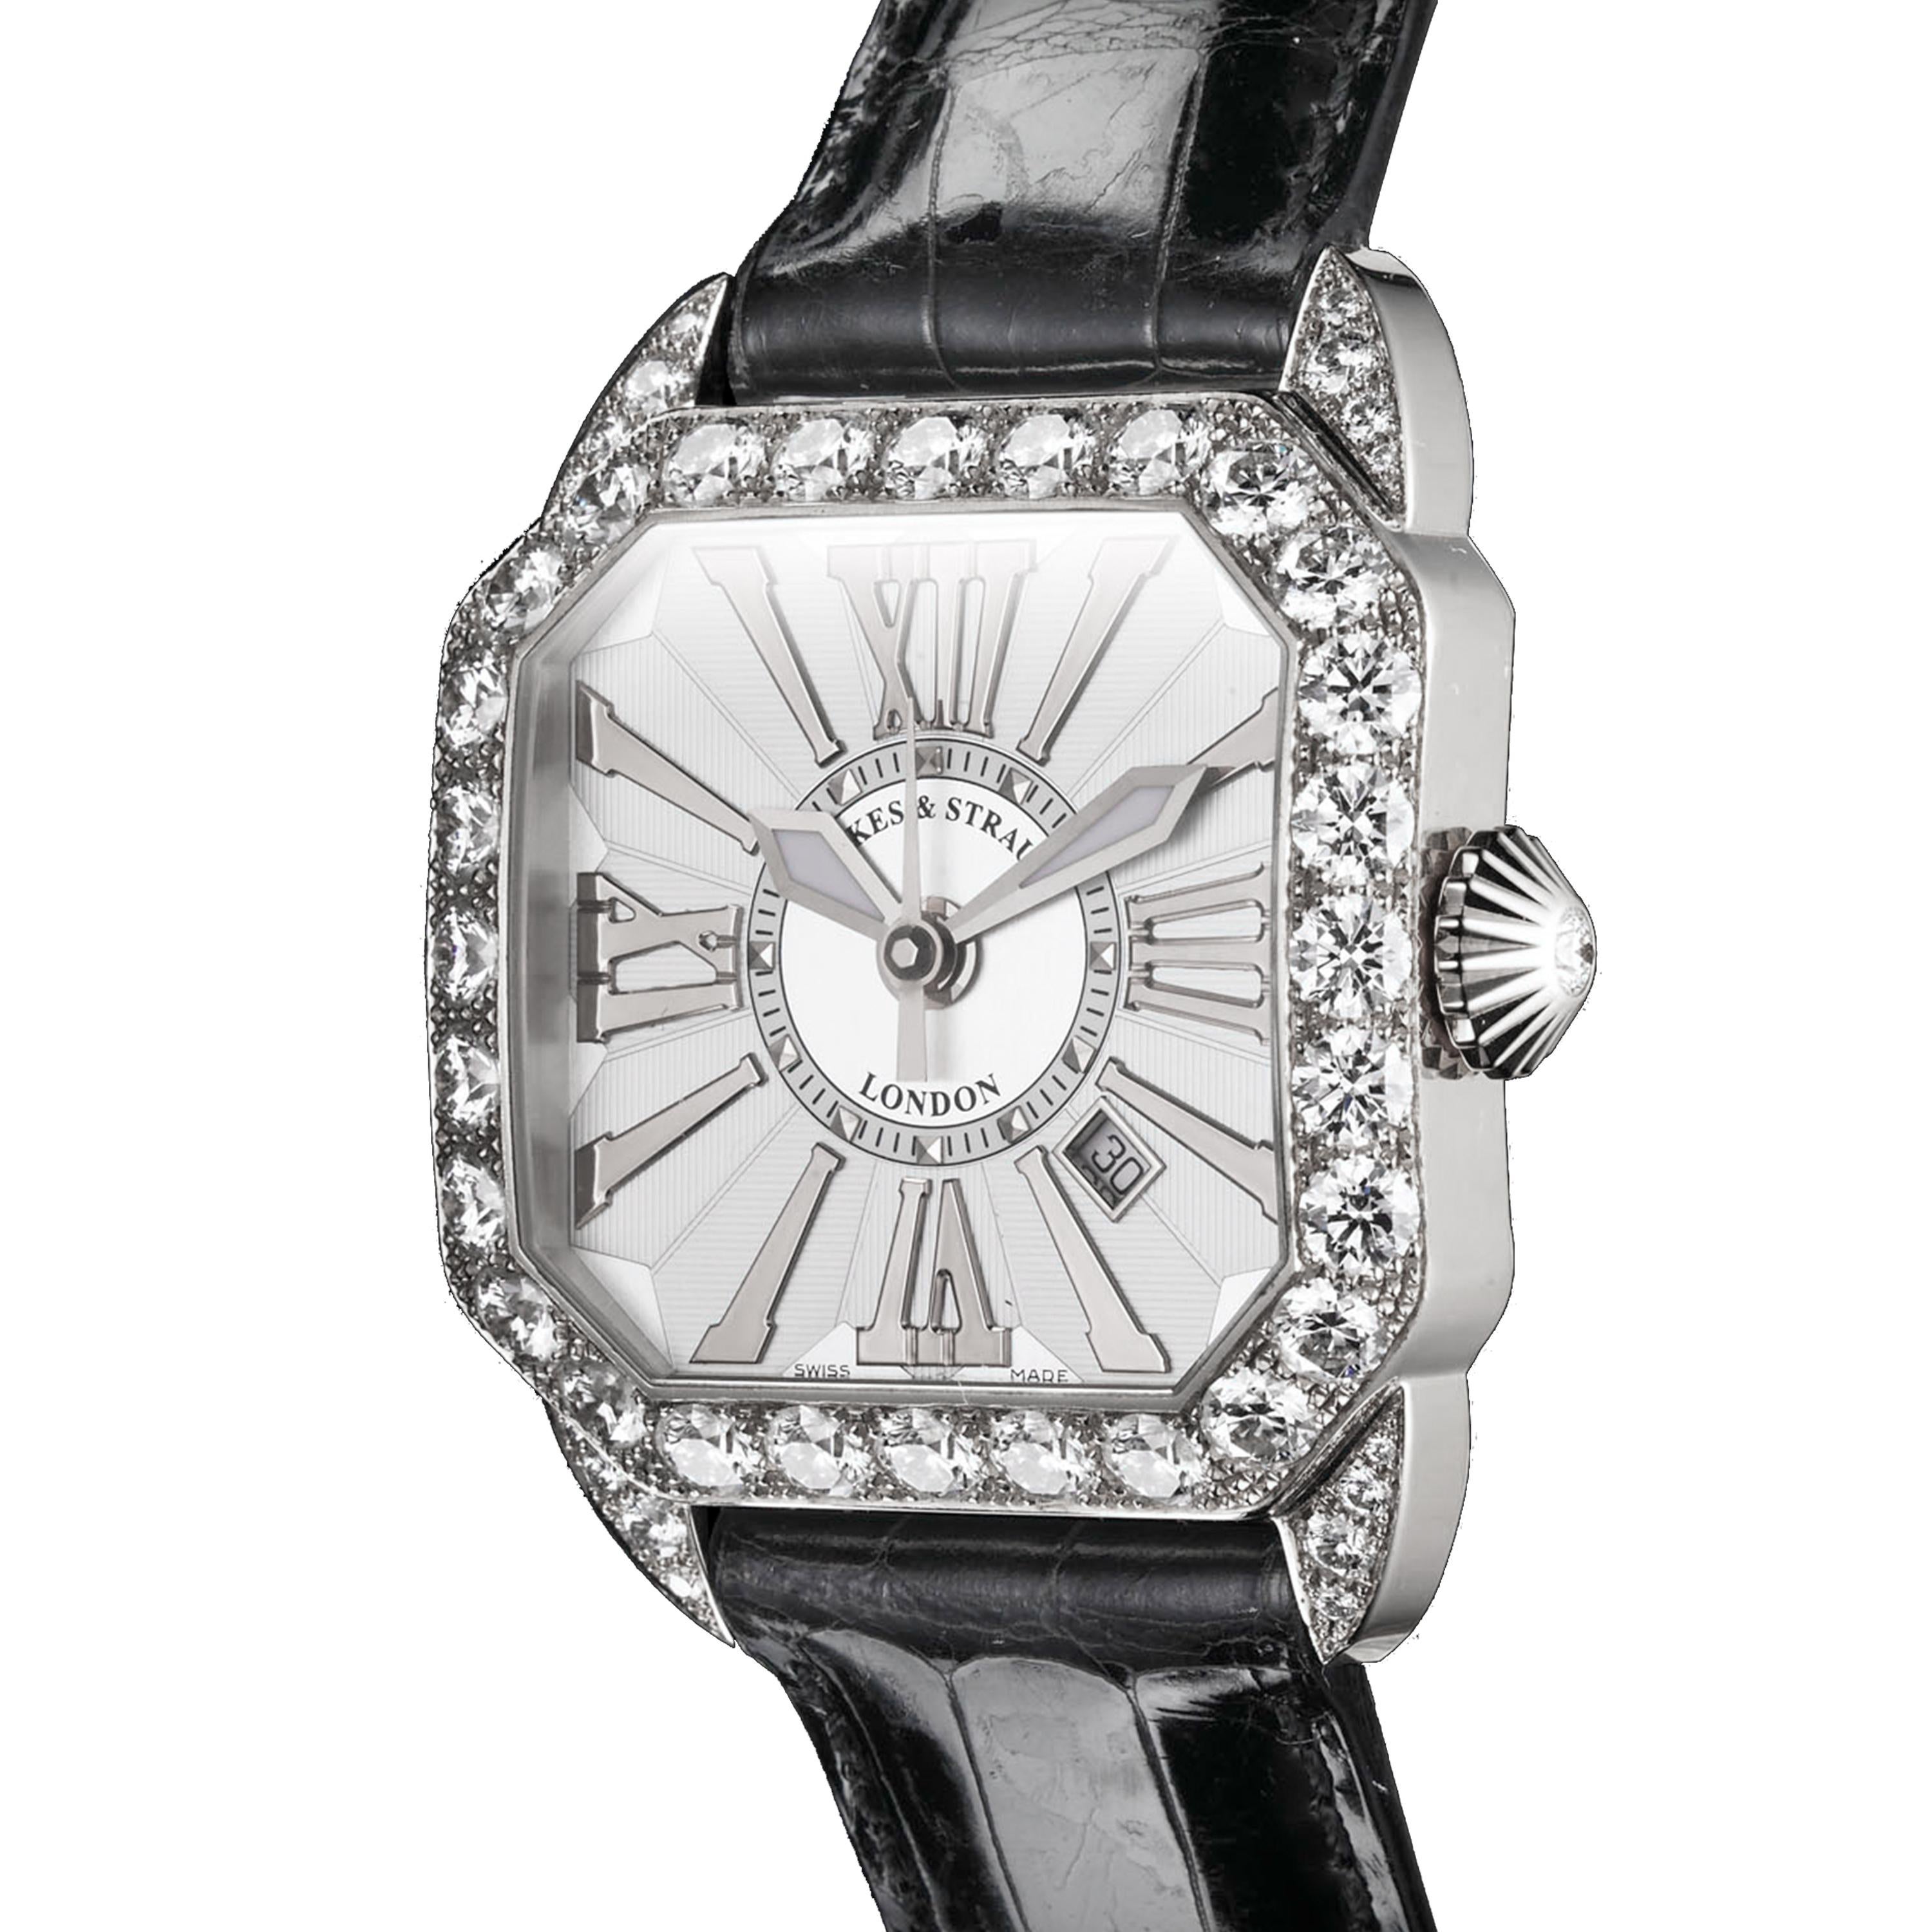 Berkeley 40 is a luxury diamond watch for men and women crafted in 18kt white gold, featuring the white dial with white gold Roman numerals, automatic movement. The case, buckle and crown are set with white Ideal Cut diamonds. It is a 40 mm elegant